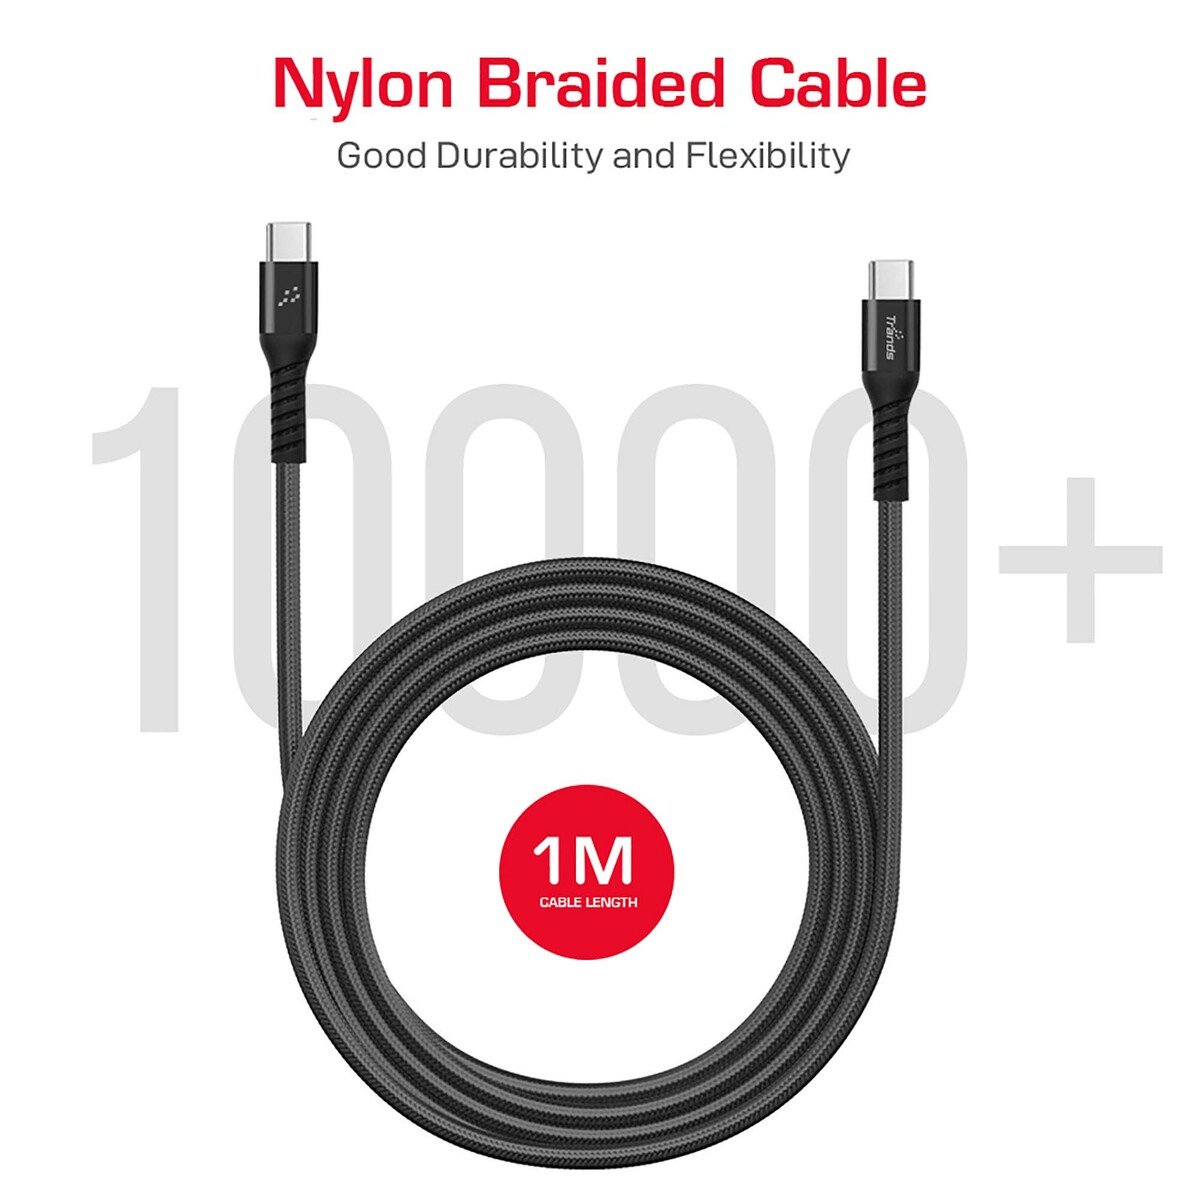 Trands 100W Nylon Braided Type-C Cable 1 meter CA675, Black